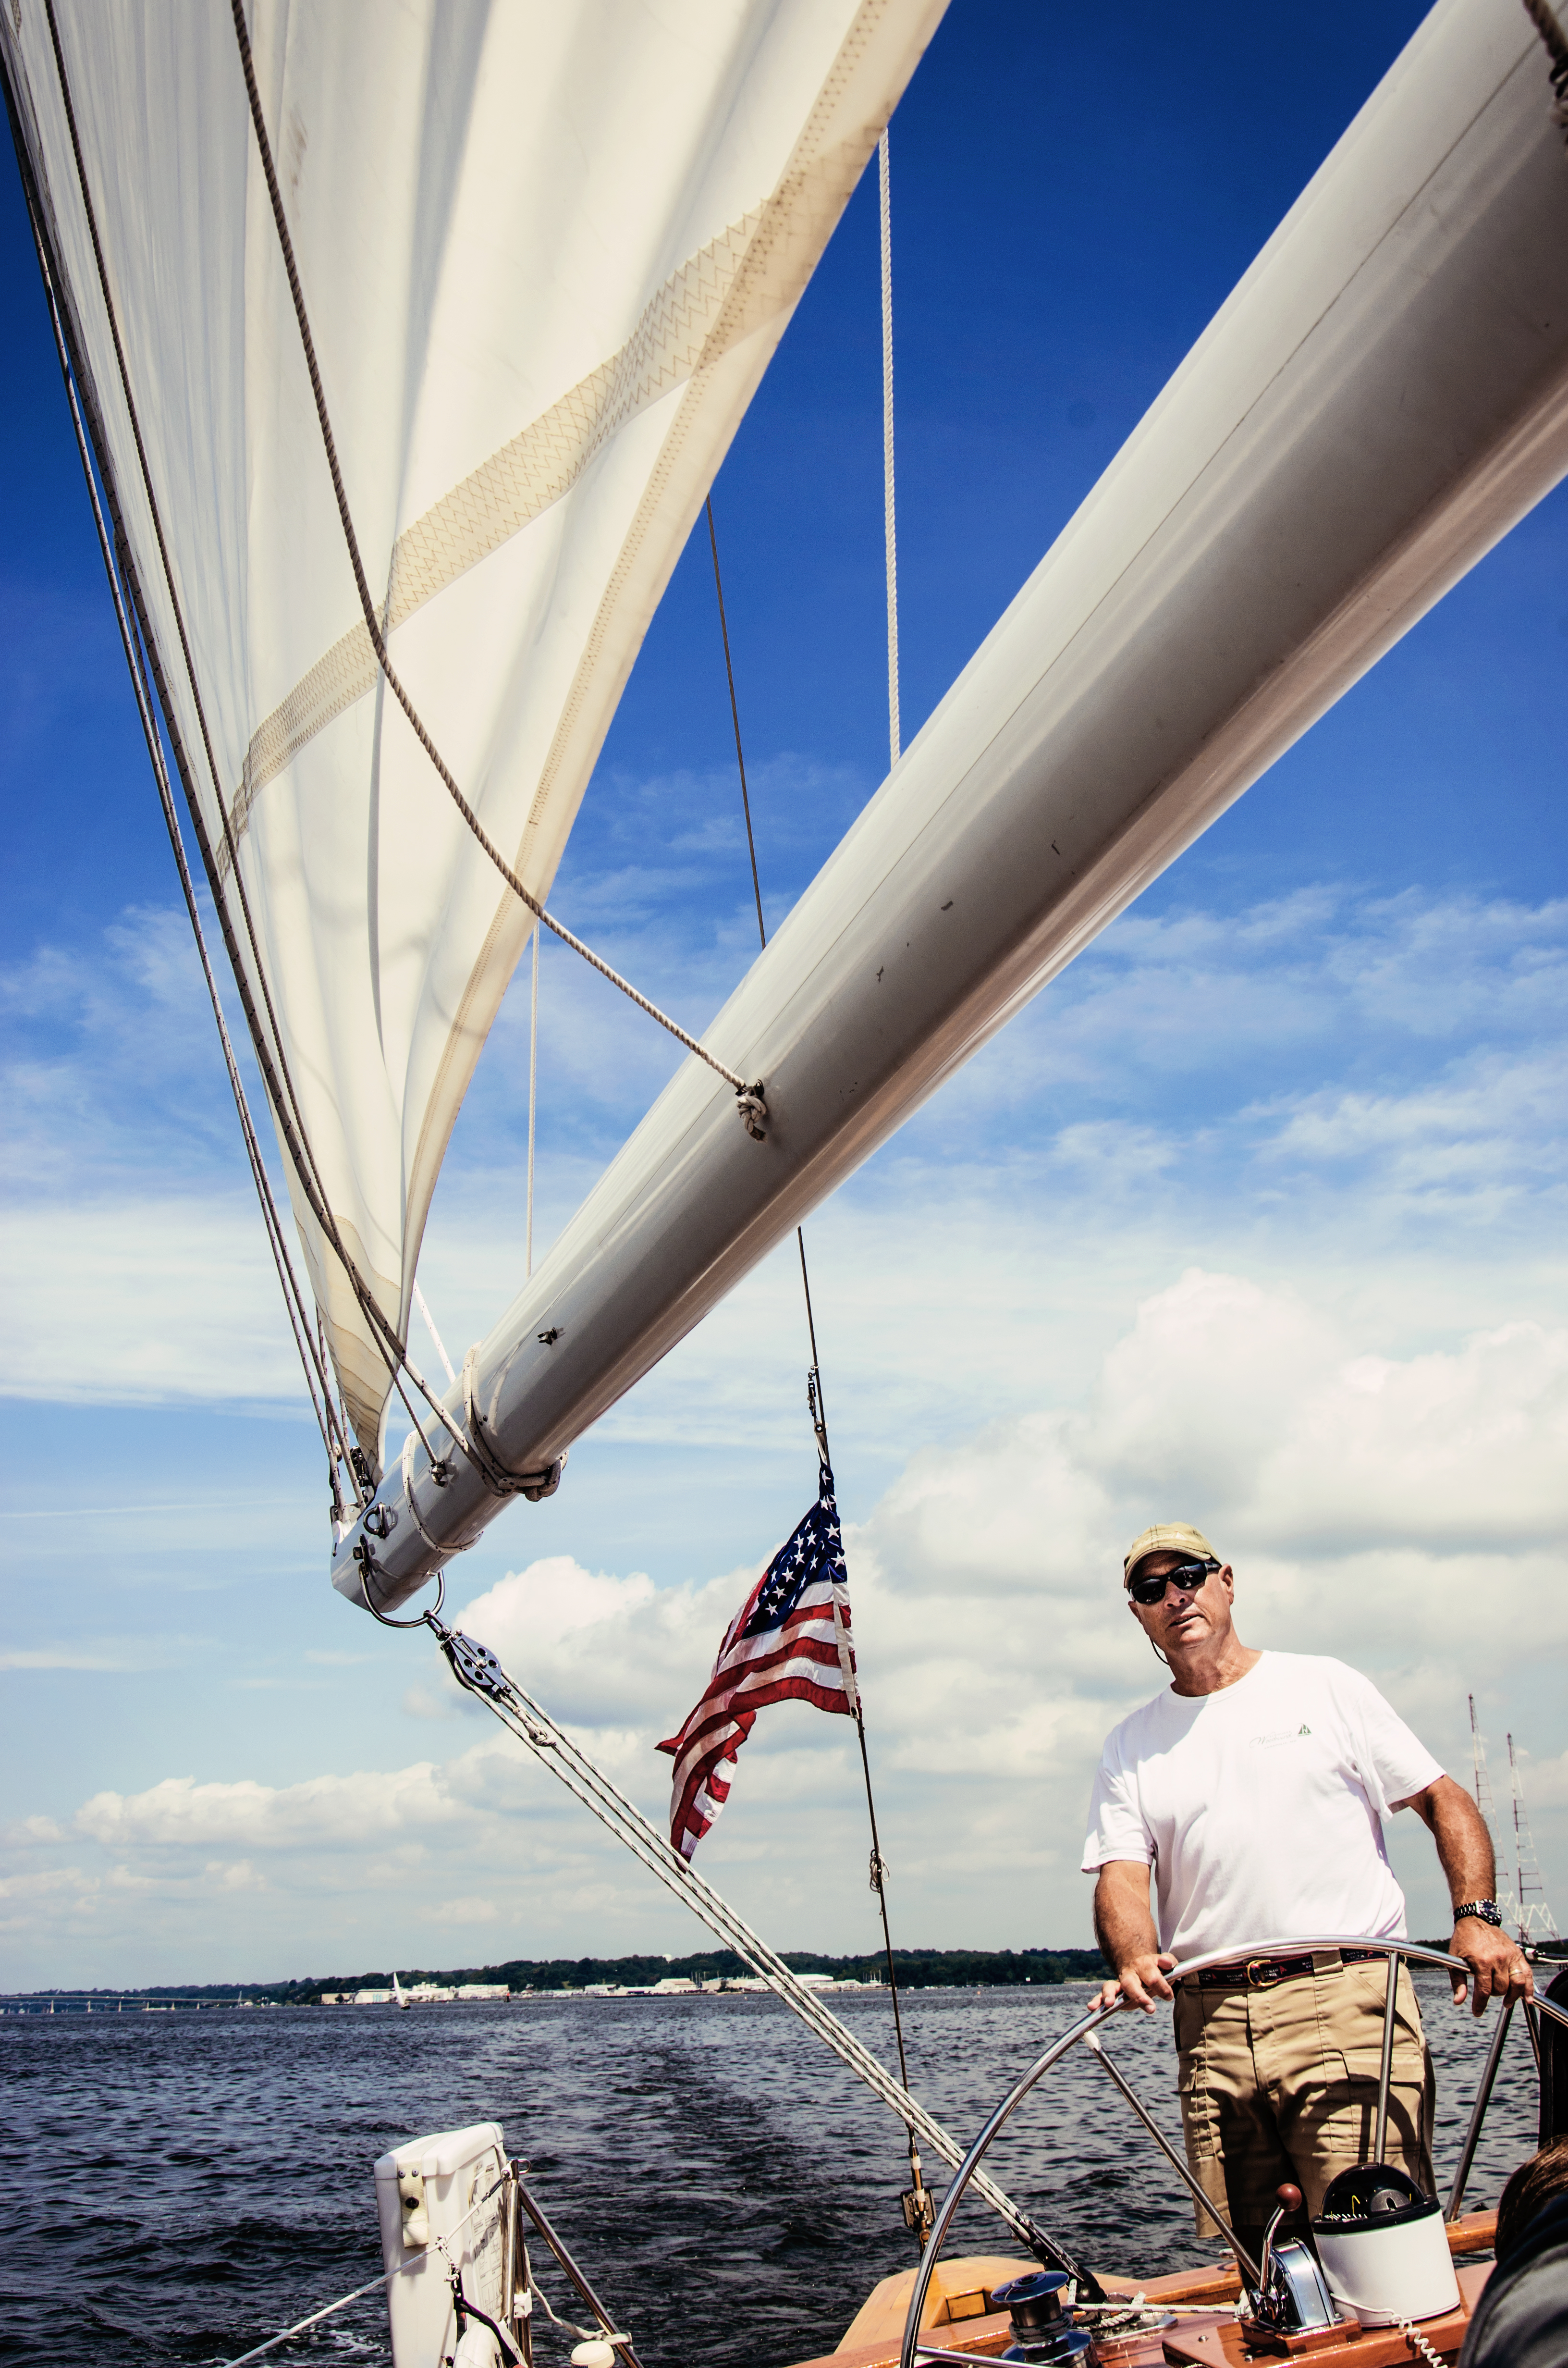 Blue skies and fair sails with the captain at the helm